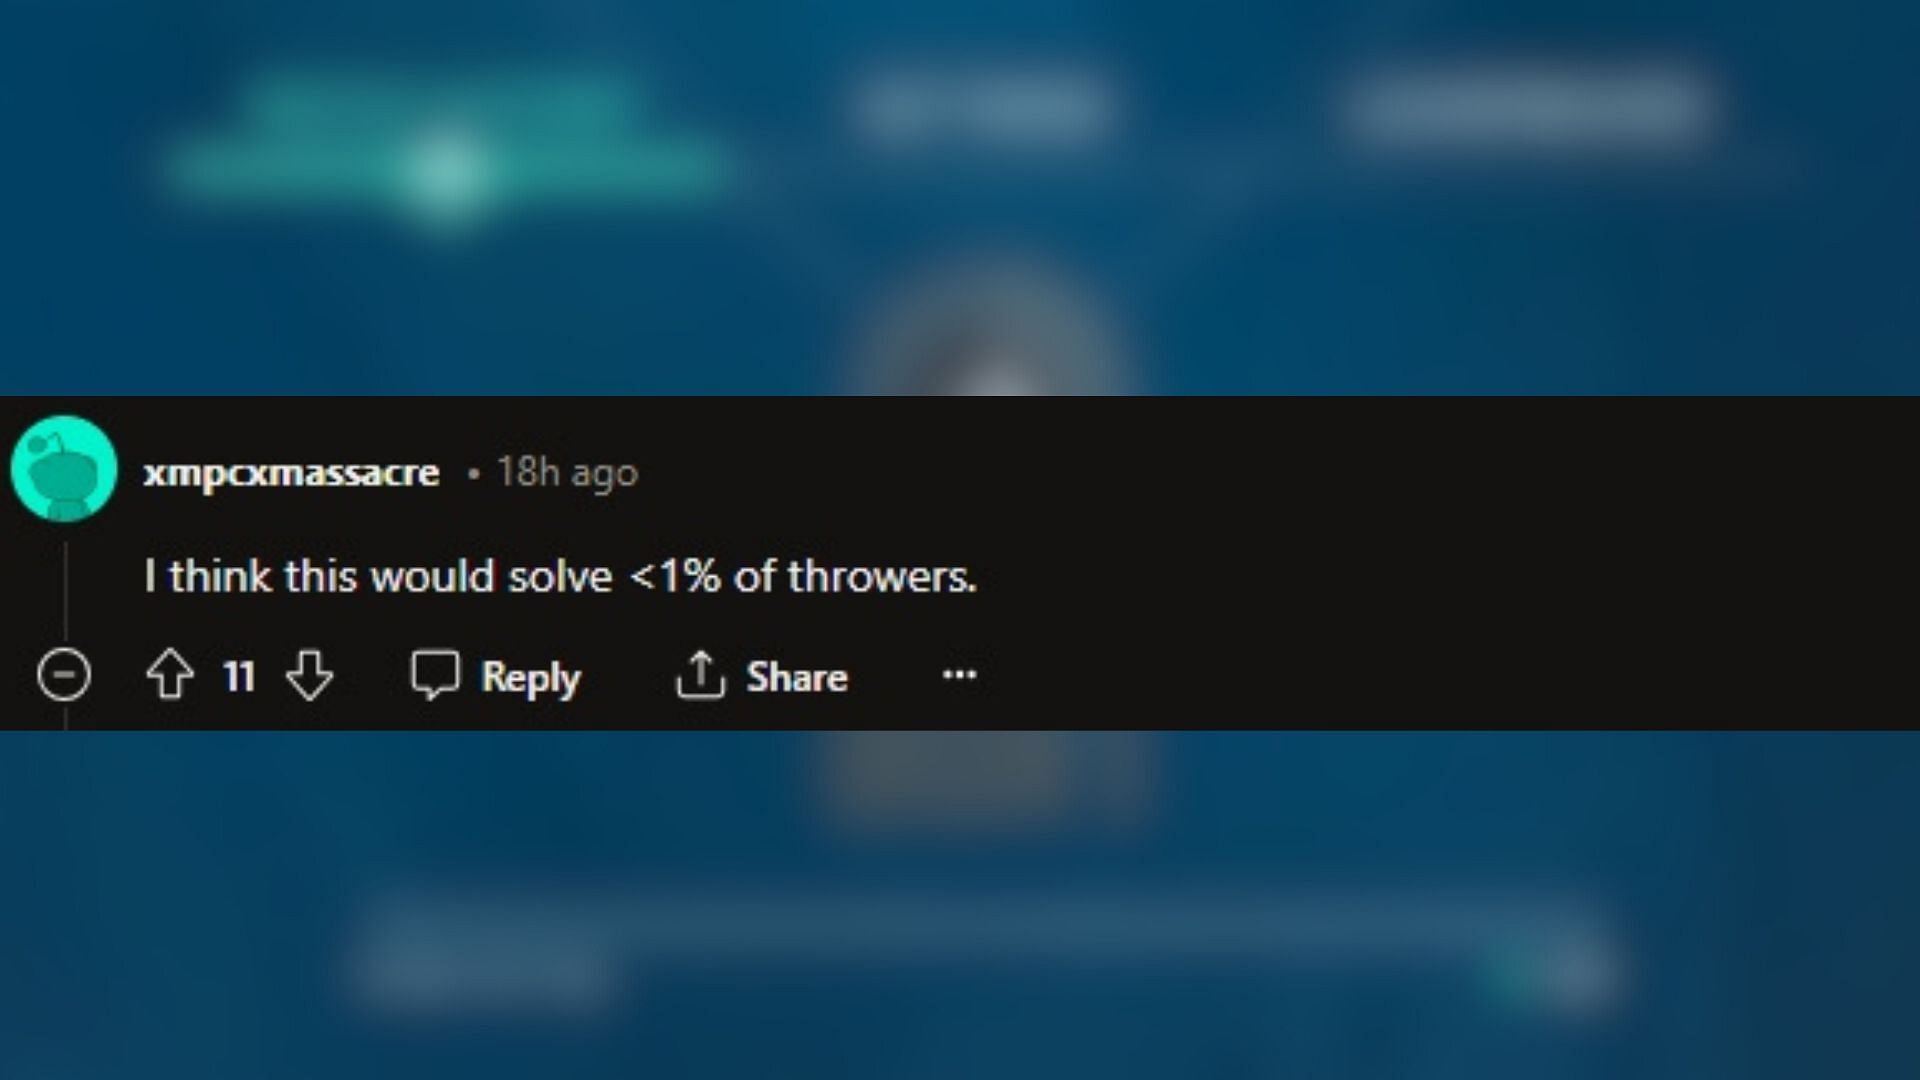 Less than 1% of throwers will be solved (Image via Reddit/u/xmpcxmassacre)